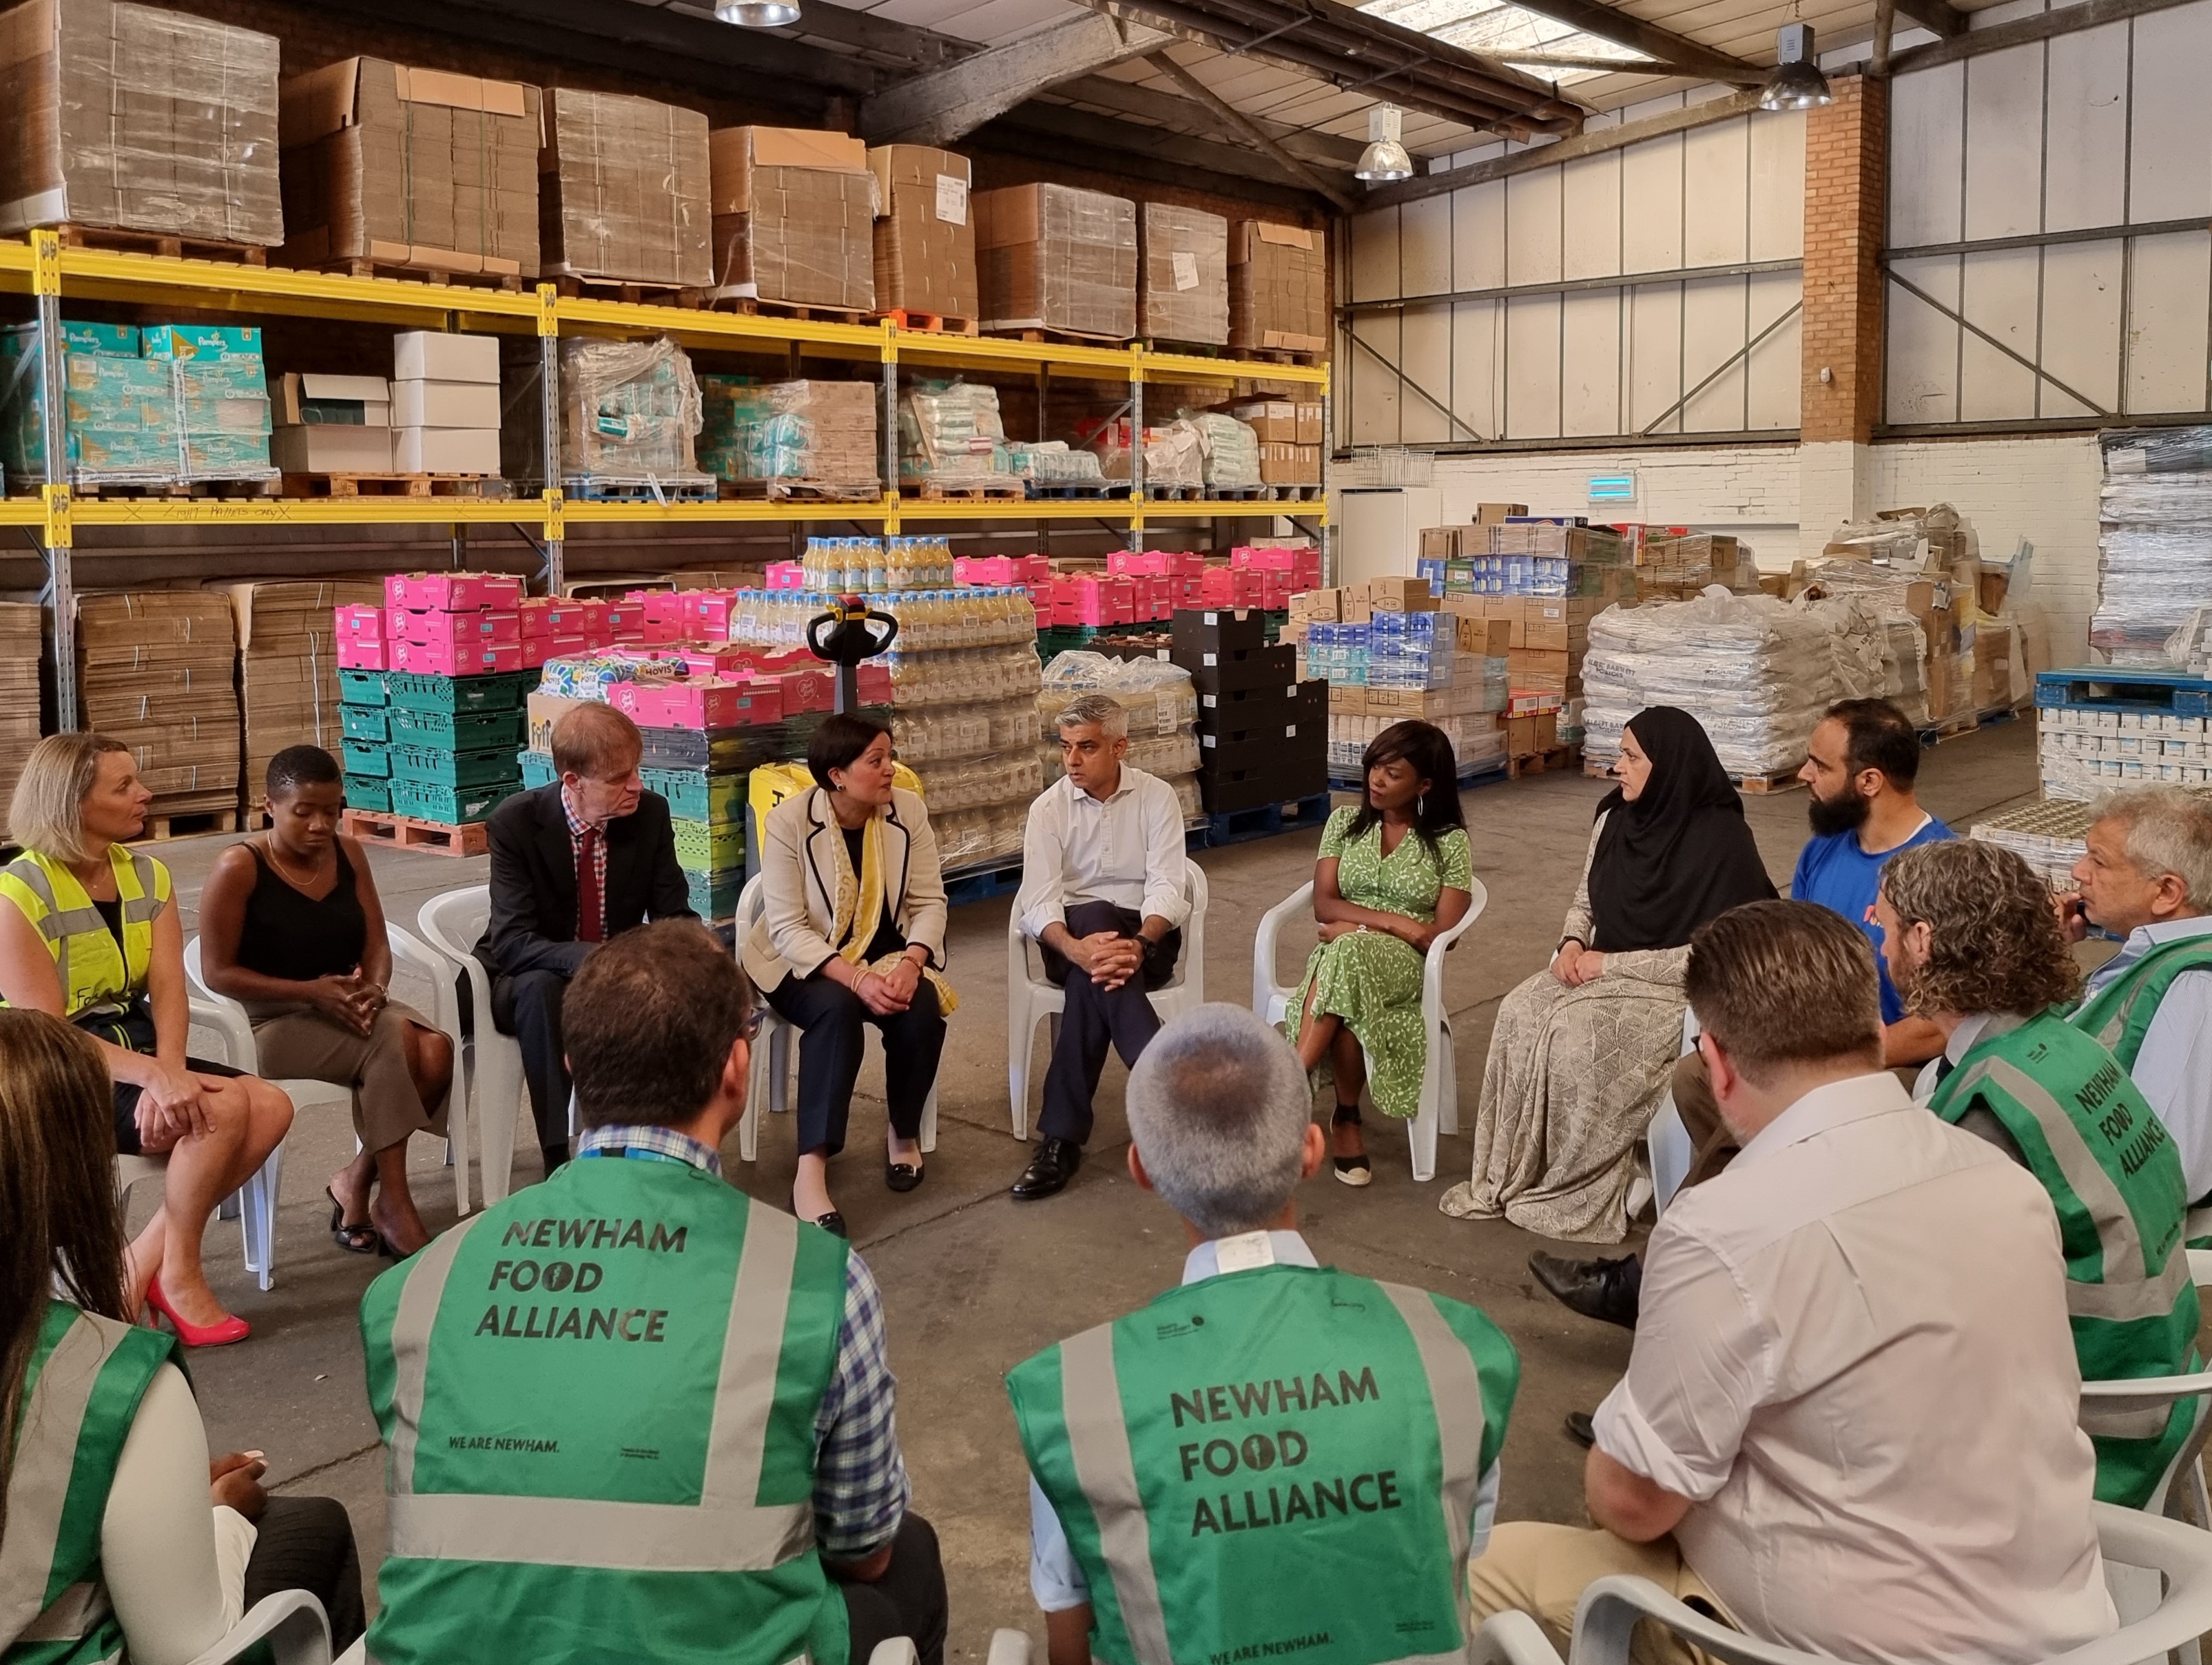 cost of living crisis event - Newham Council at the forefront of action to help residents in food poverty as Mayor urges Government to tackle the cost of living crisis and prevent a major food emergency unlocked